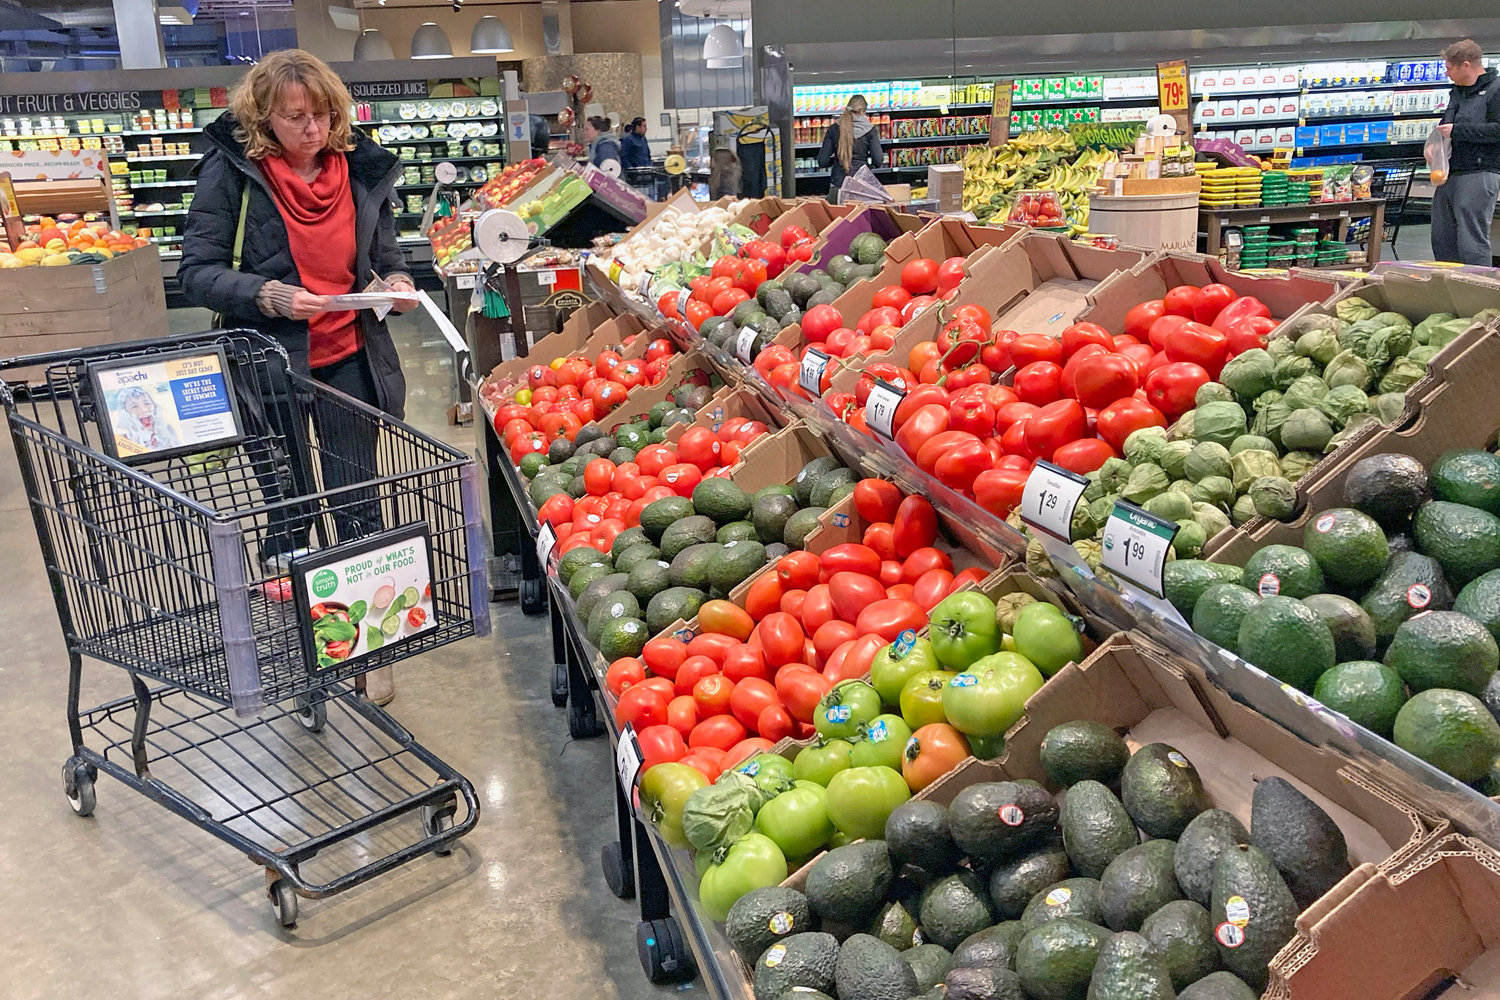 Shoppers pick out items at a grocery store in Glenview, Ill., Saturday, Nov. 19.